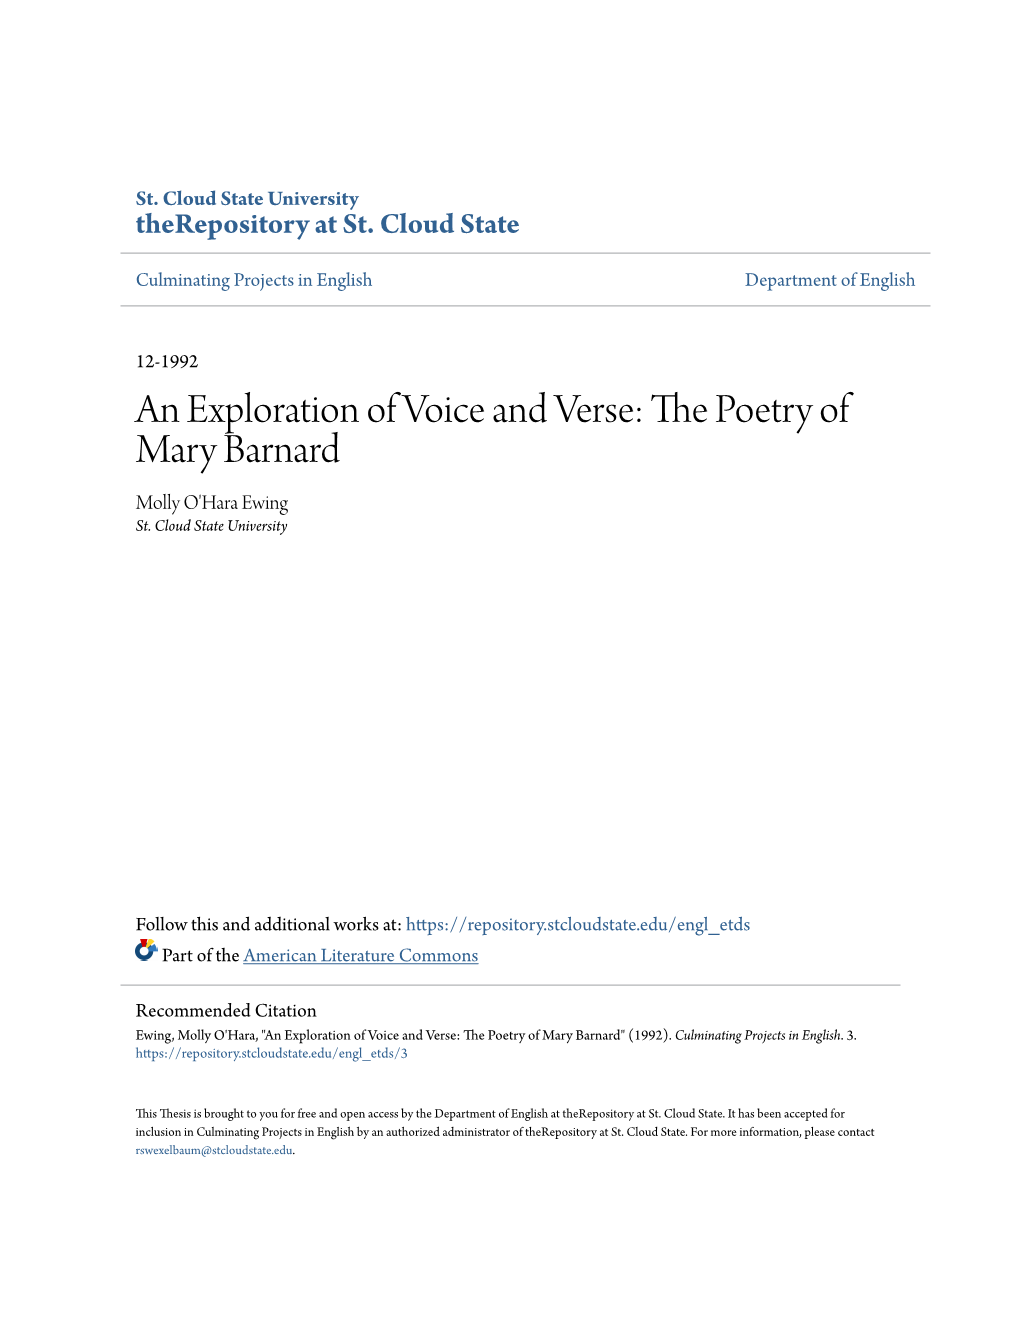 An Exploration of Voice and Verse: the Poetry of Mary Barnard